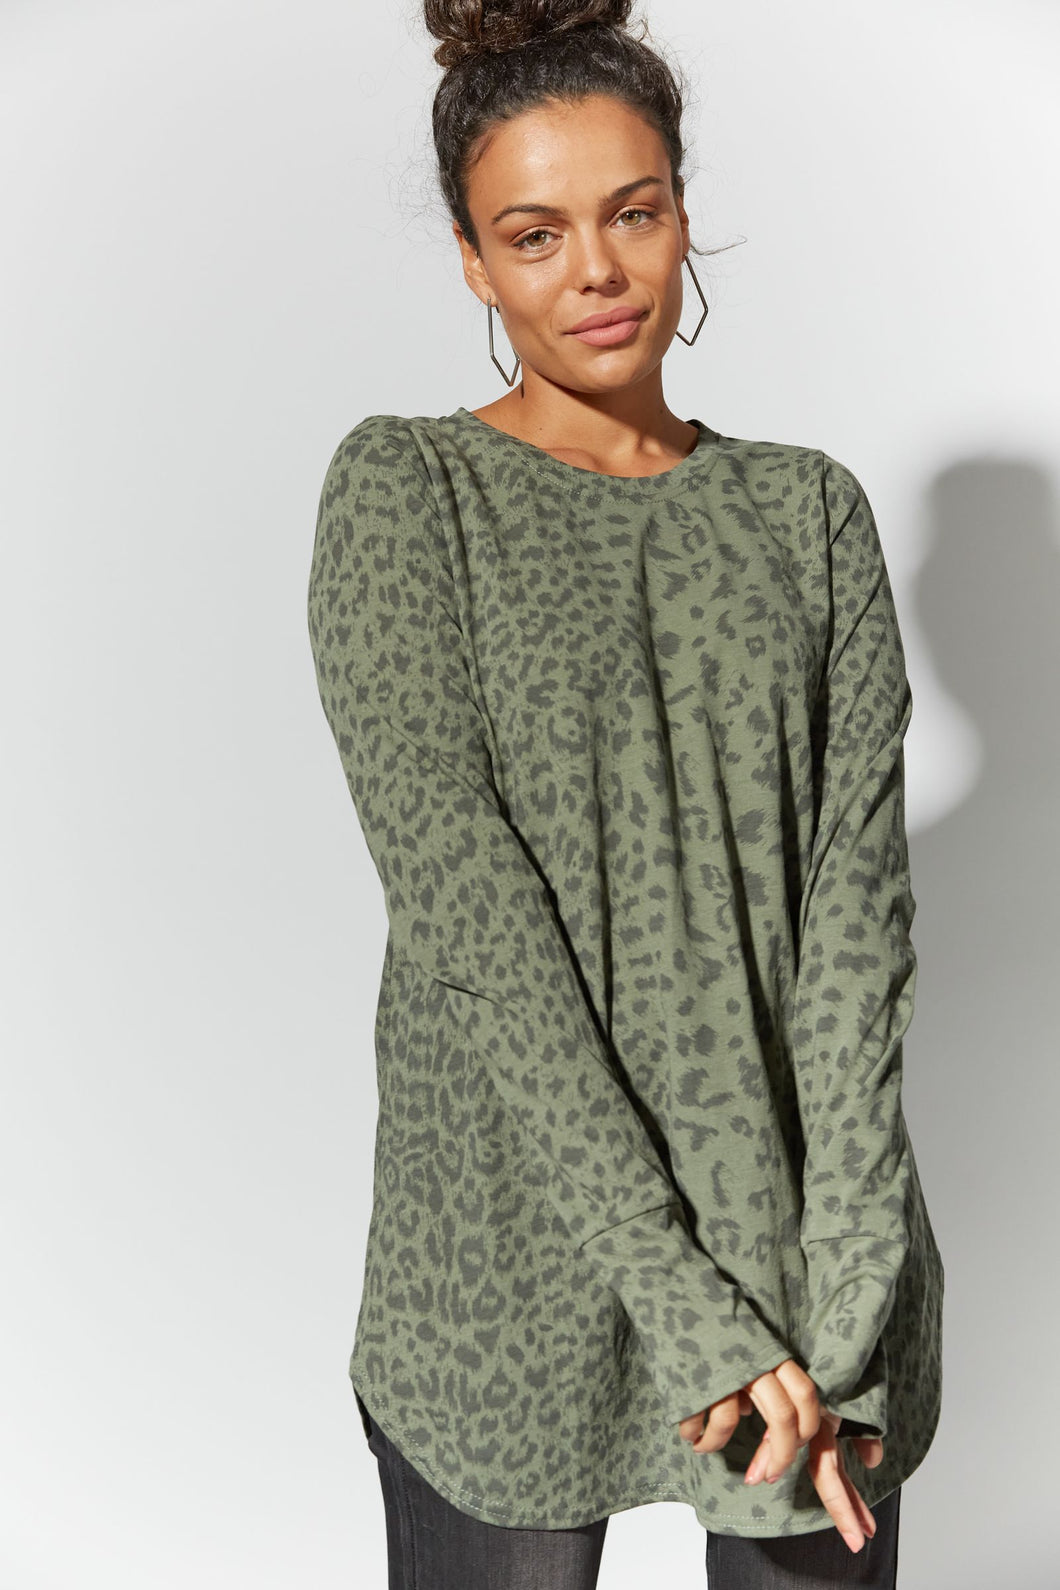 Zambia tshirt, Haven, long sleeve tee, navajo, fern, clay, raven, thumb hole, round neck, scoop front and back, side splits, leopard print, winter 2022, autumn 2022, smart casual, on trend, small business, online